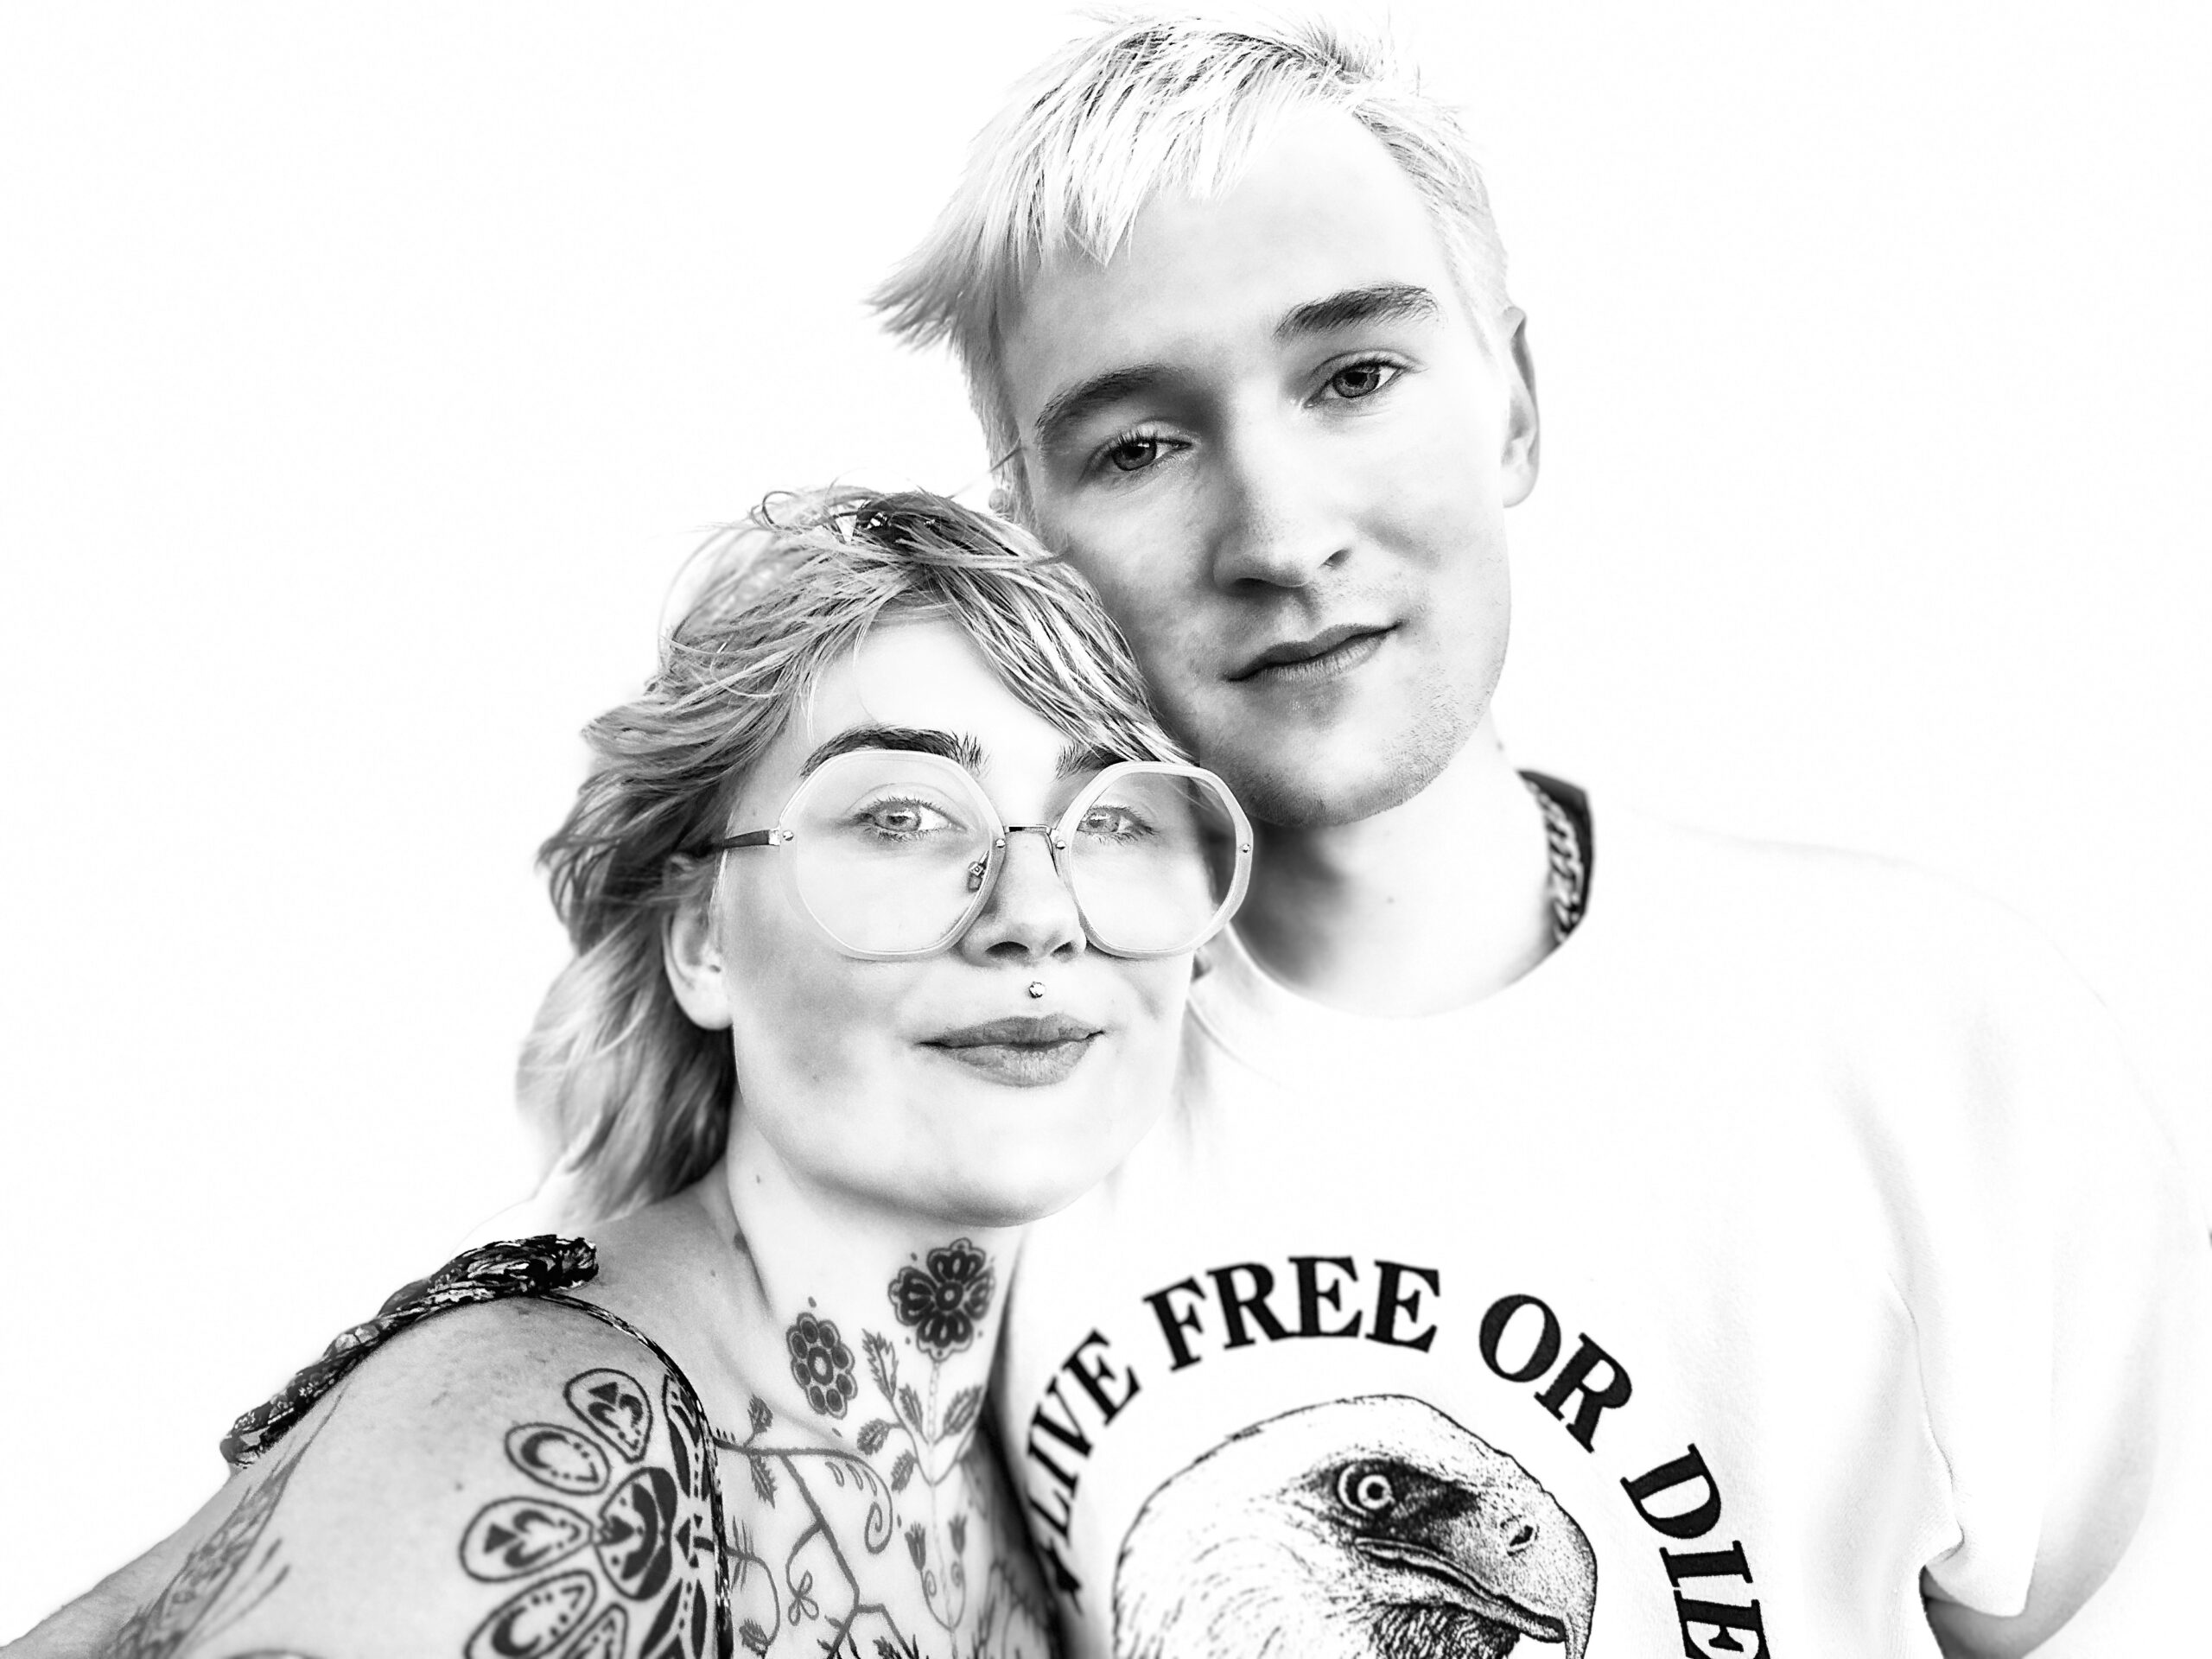 A black and white photo of two people  with tattoos.